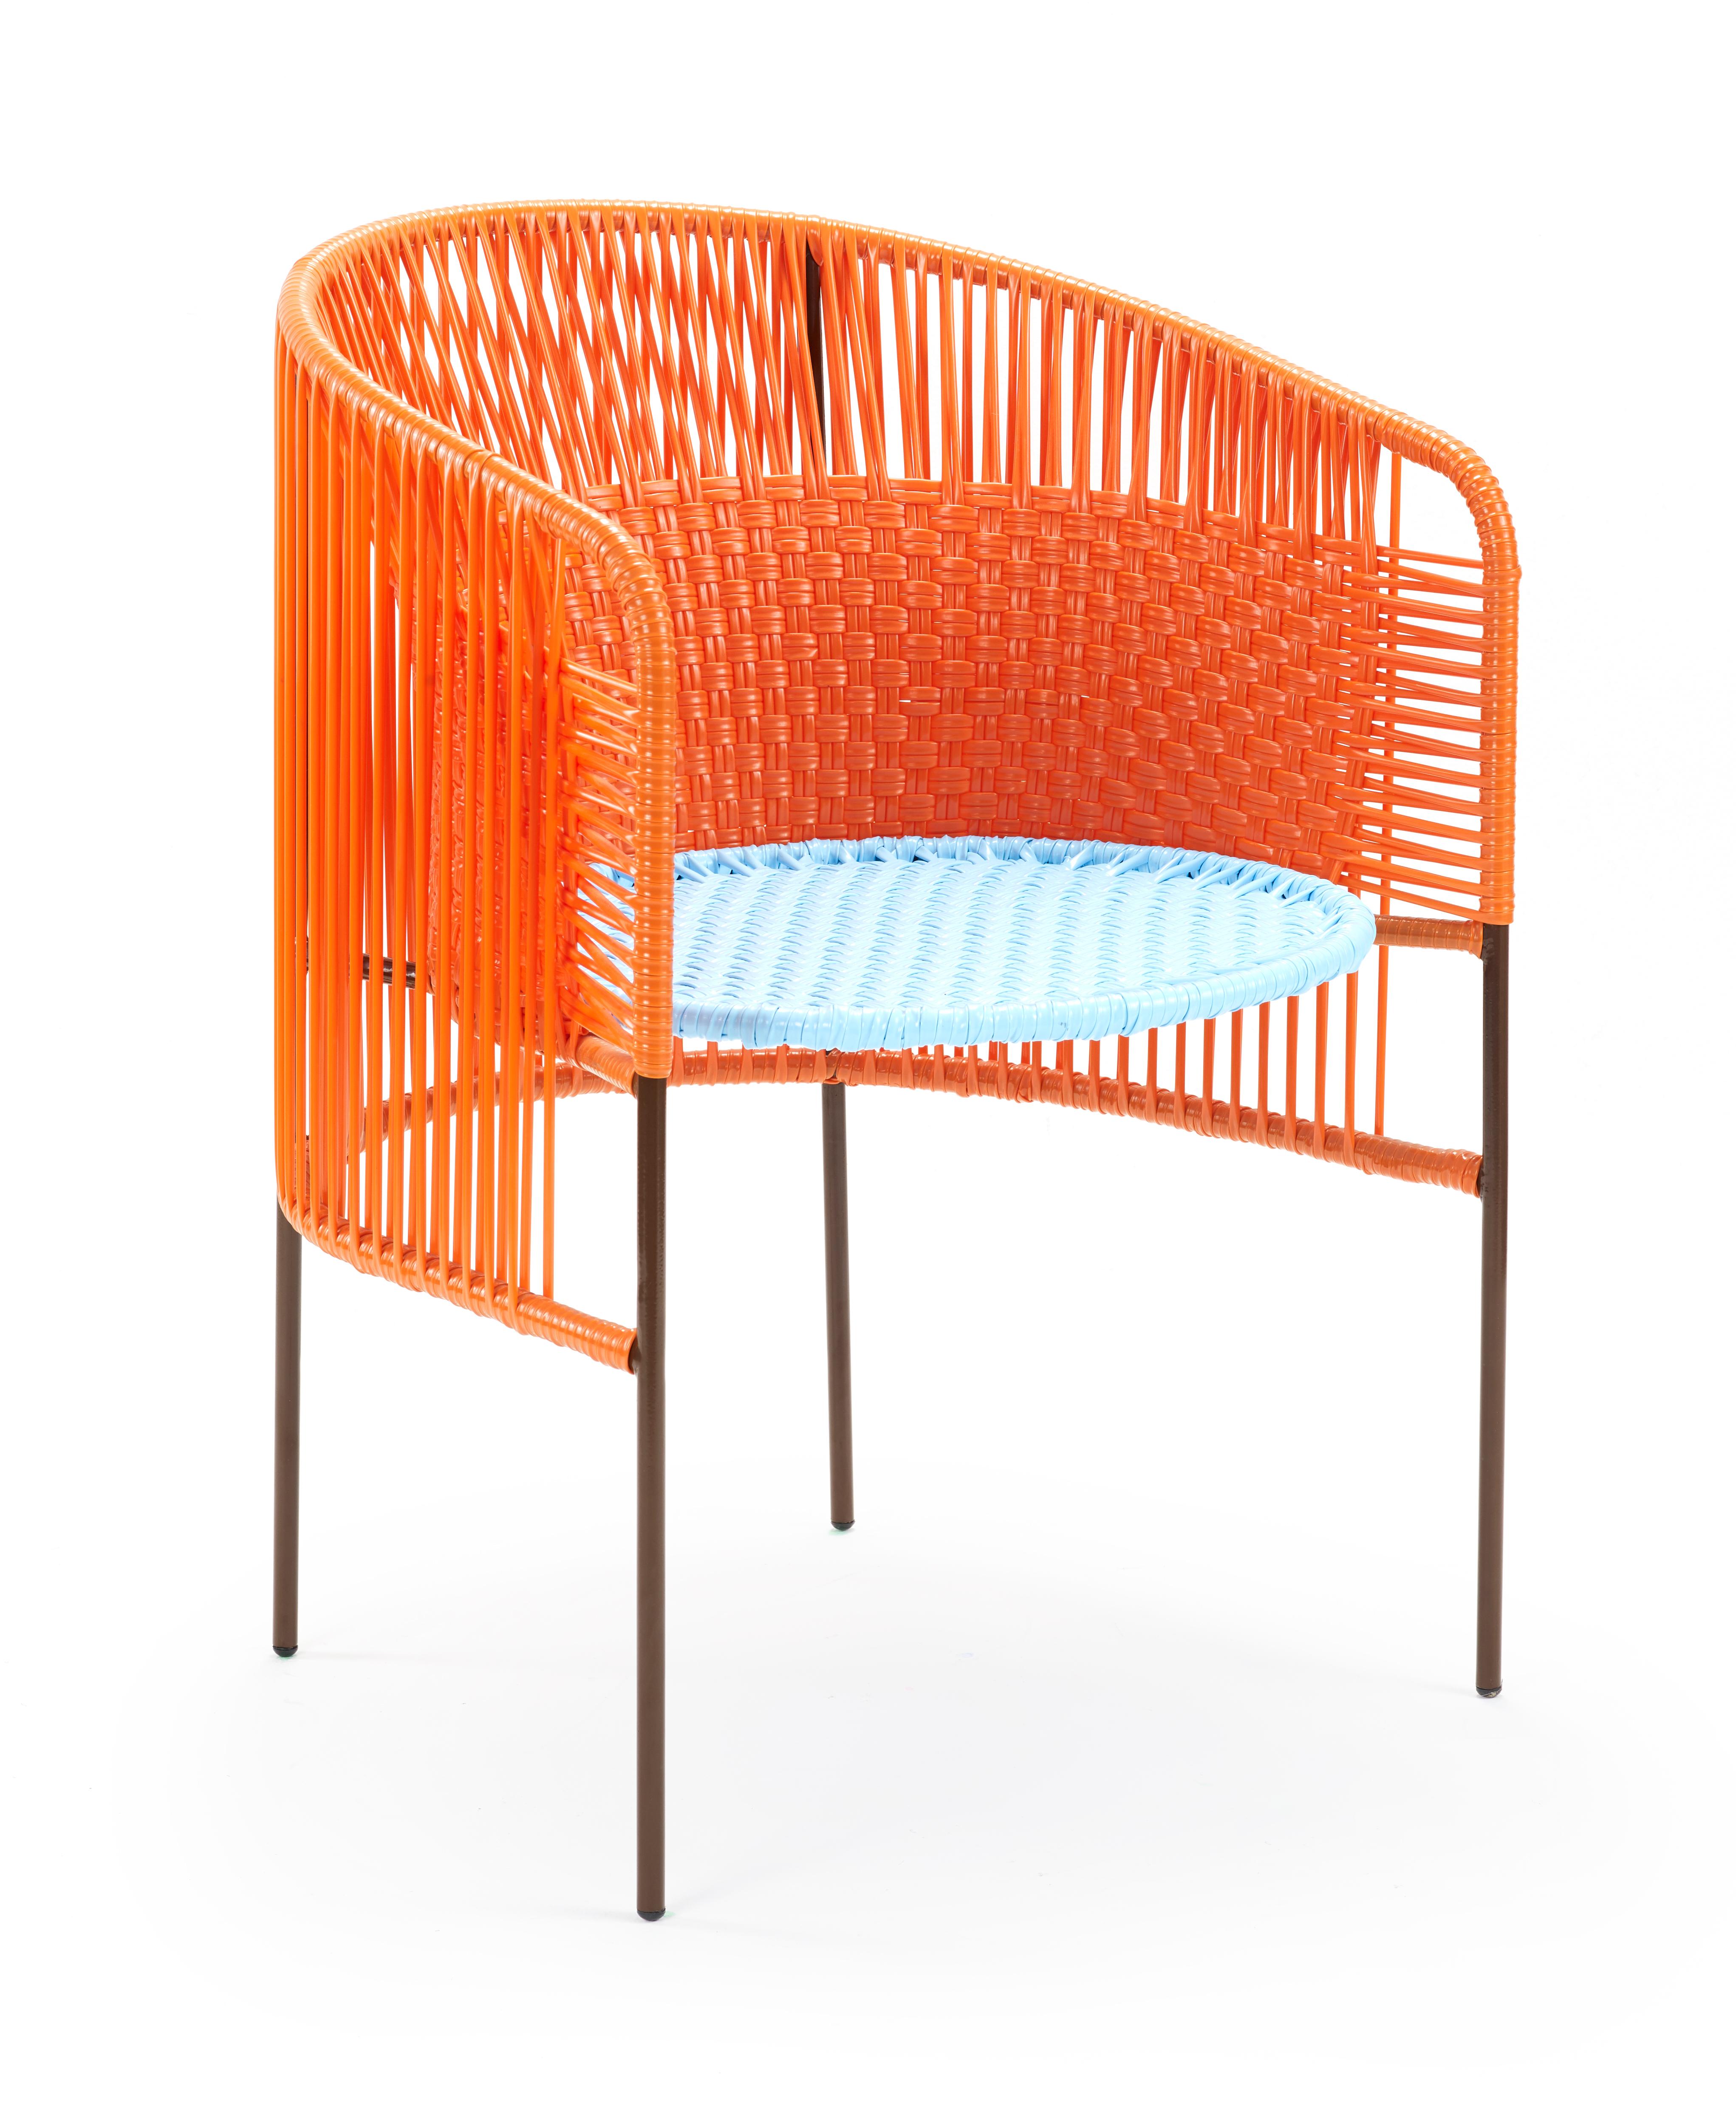 Set of 4 orange mint caribe dining chair by Sebastian Herkner.
Materials: galvanized and powder-coated tubular steel. PVC strings are made from recycled plastic.
Technique: made from recycled plastic and weaved by local craftspeople in Colombia.